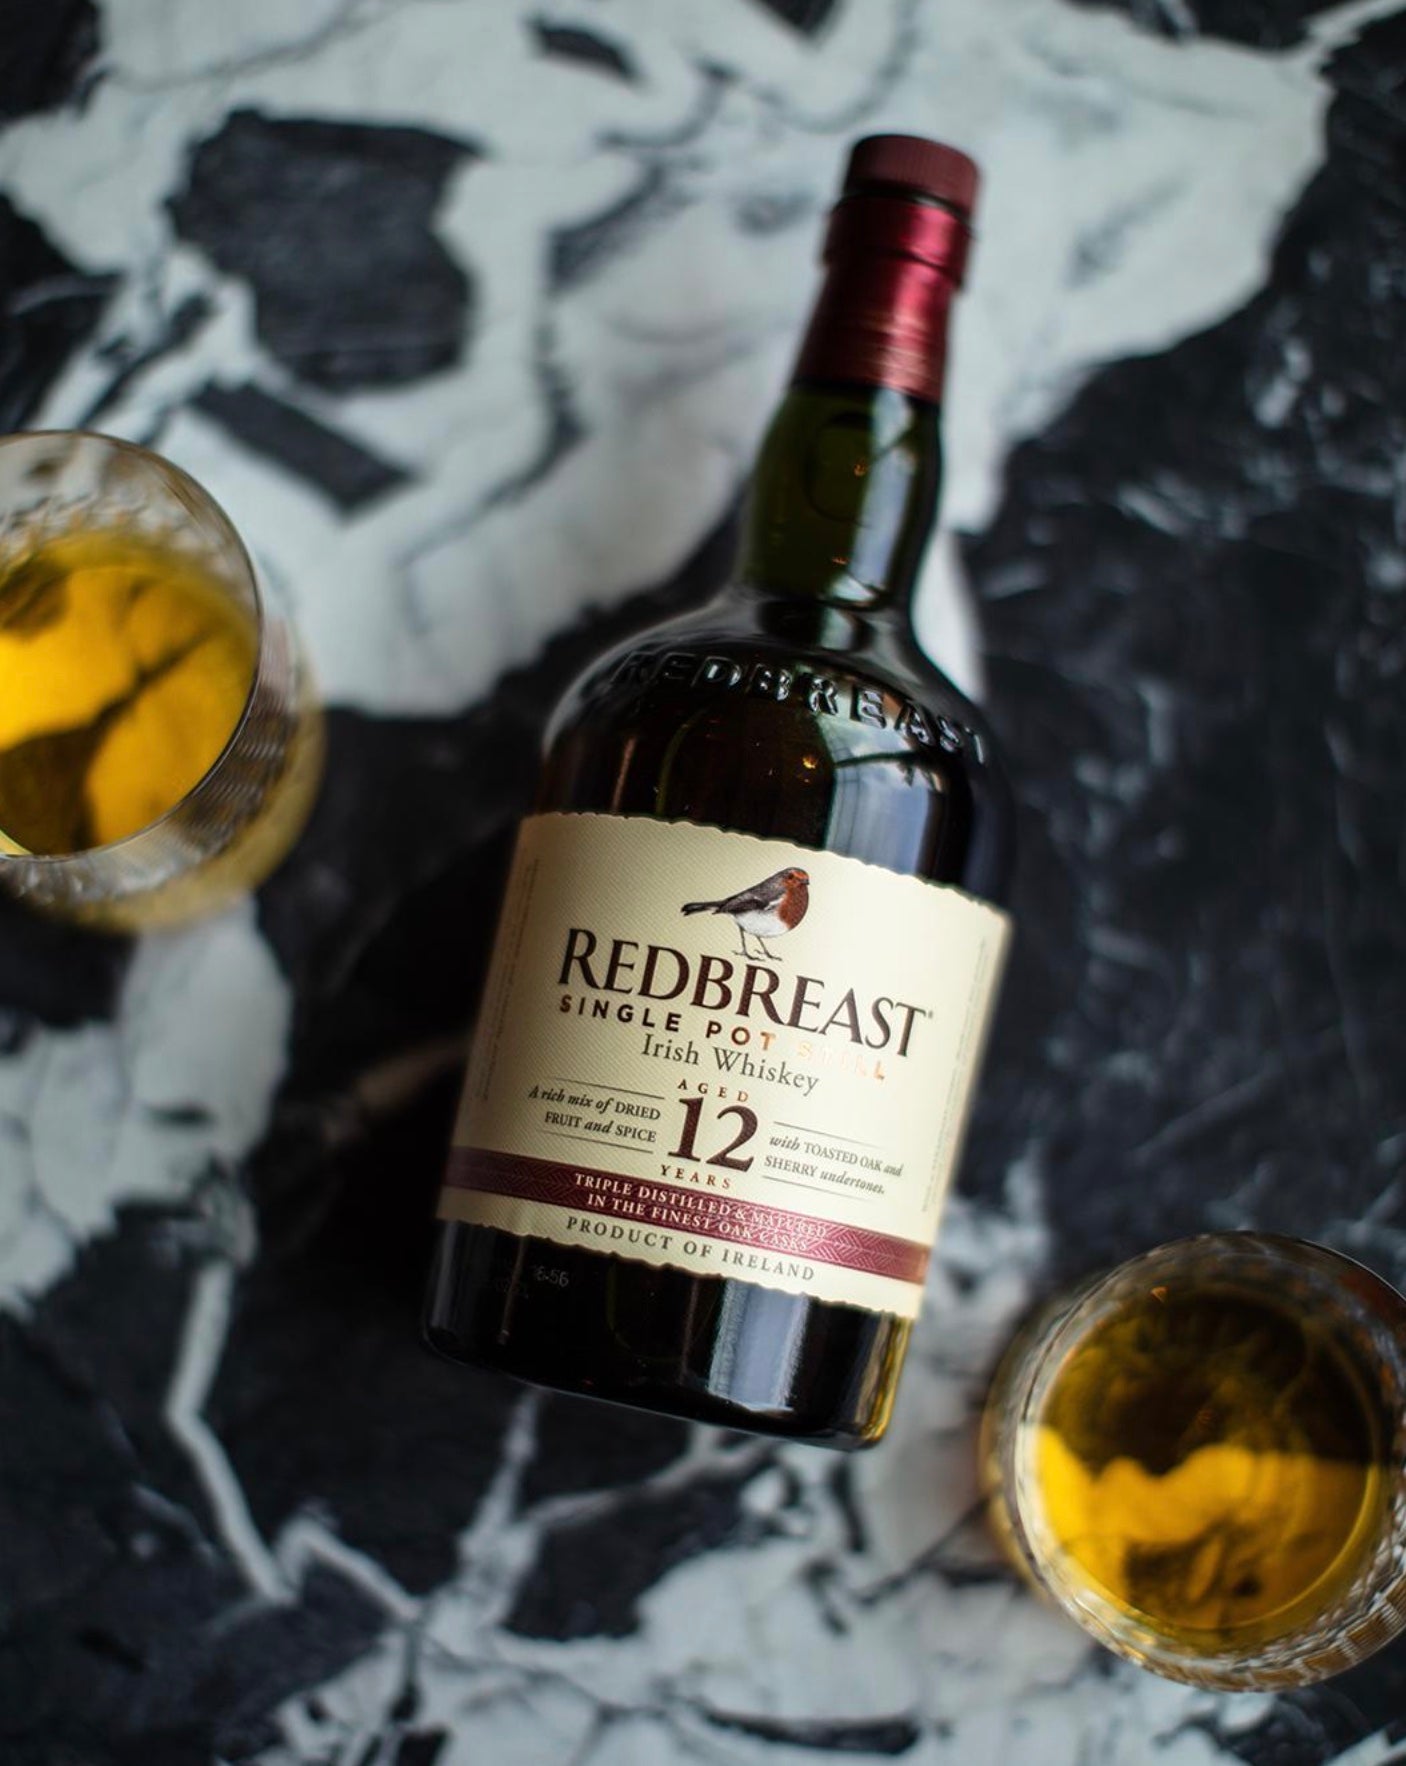 Red Breast 12 year old